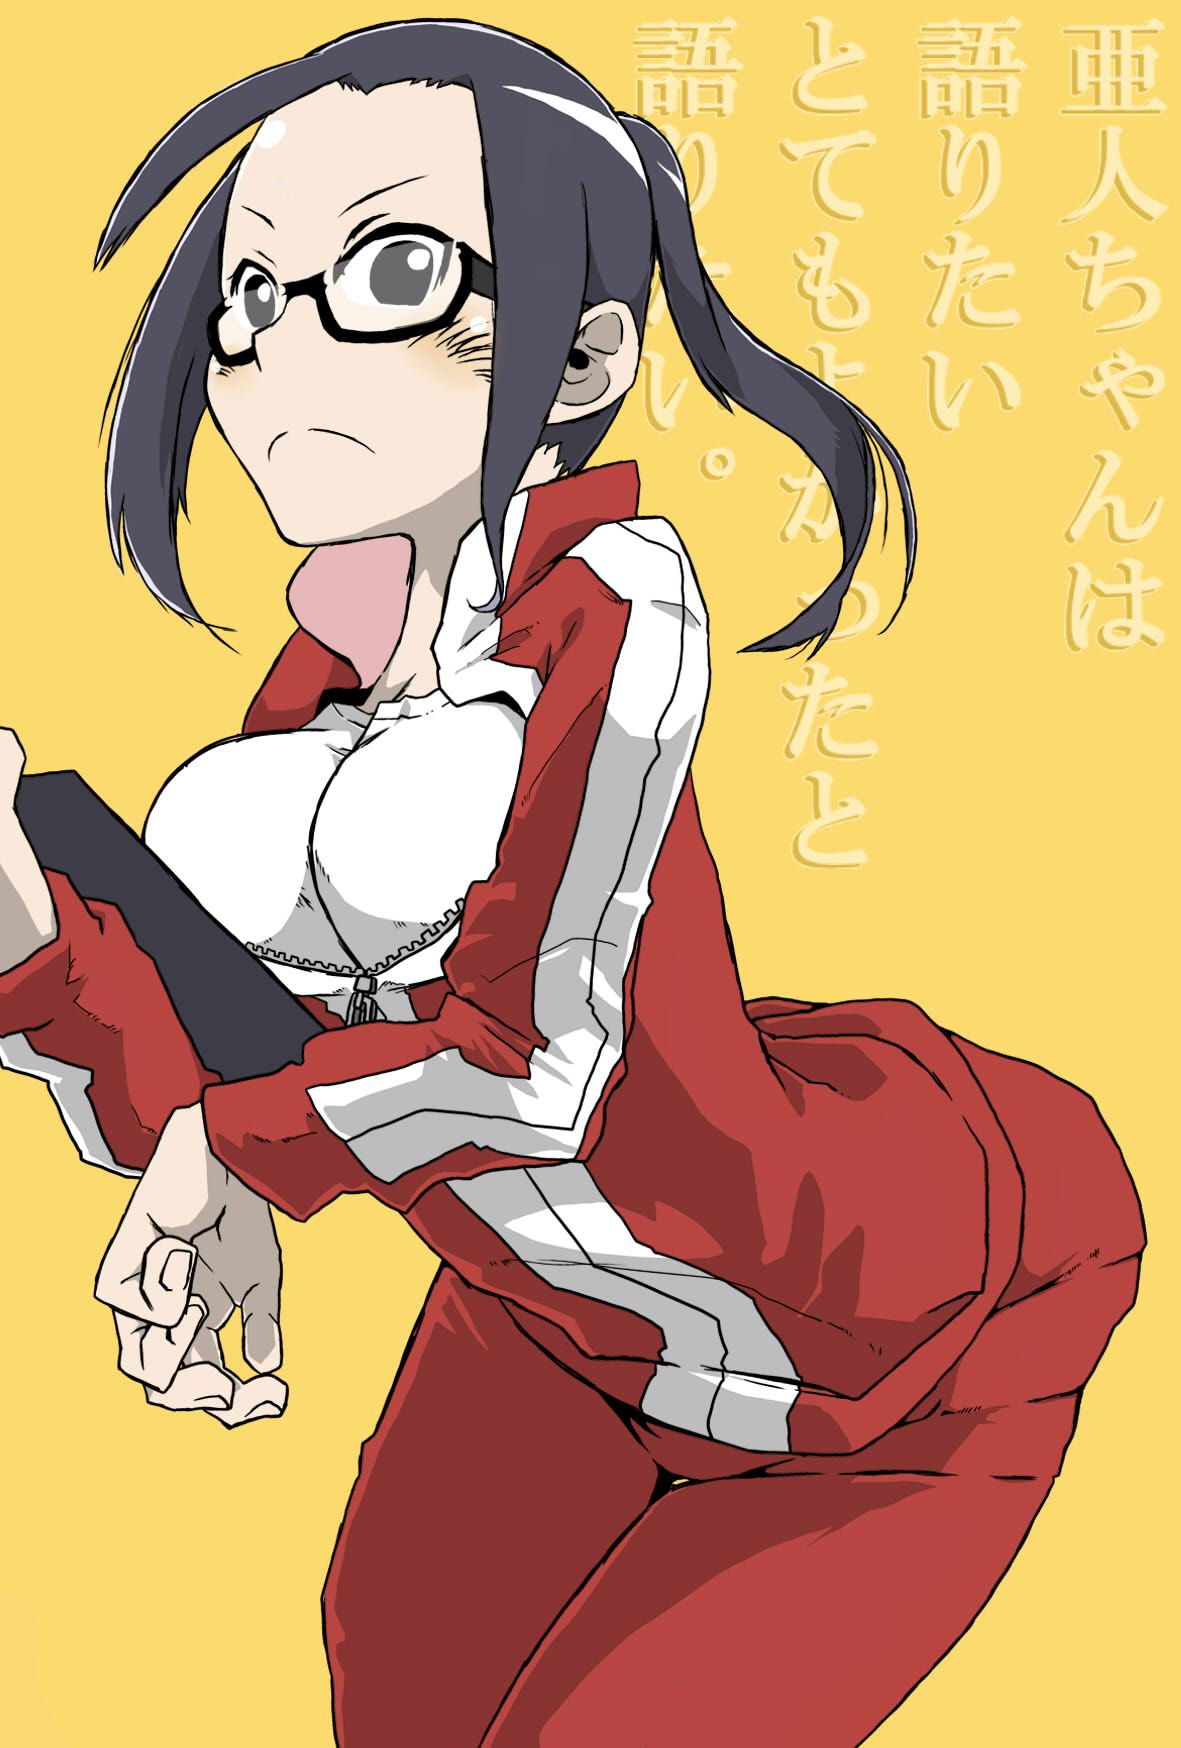 The second erotic image of the sporty girl wearing the jersey wwww part3 19